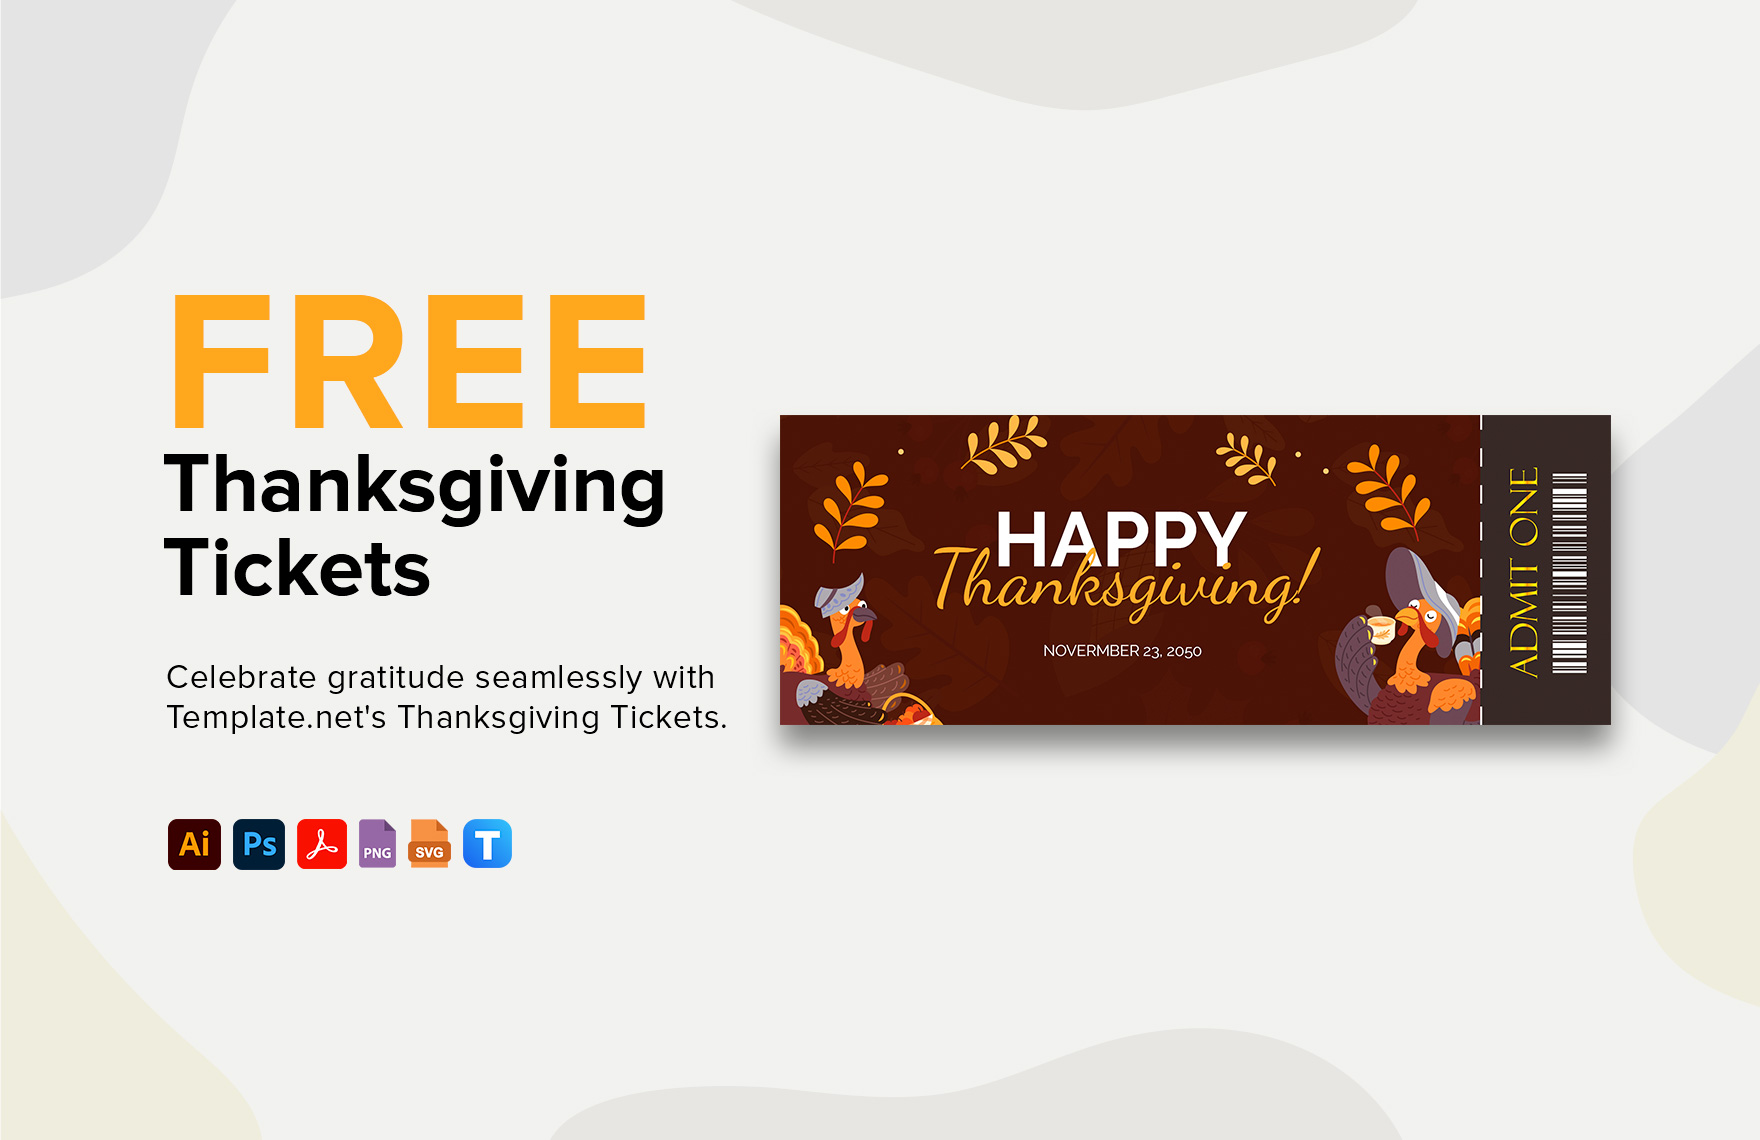 Free Thanksgiving Tickets in PDF, Illustrator, PSD, SVG, PNG